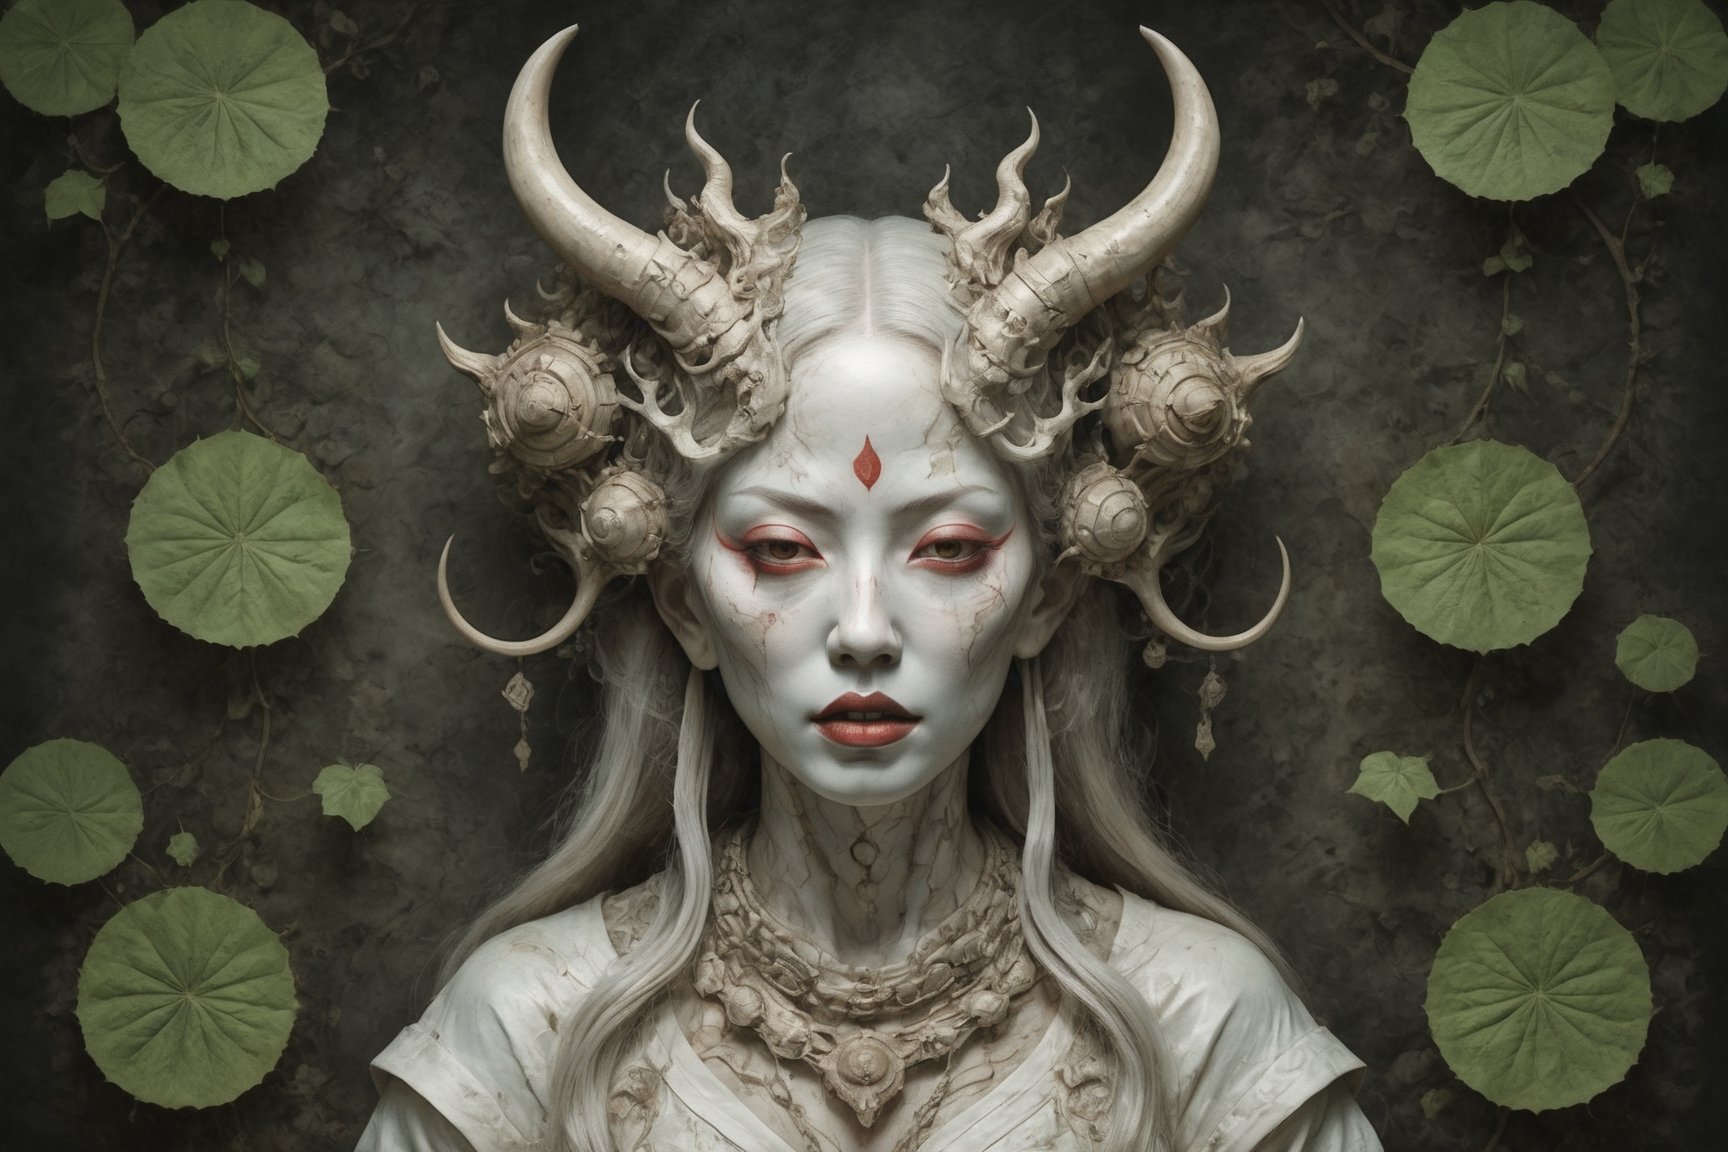 symmetrical portrait of surreal abandoned sculpture of white japanese female stunning sensual Tengu (with a splashing coloration of Alberto Seveso and Basil Gogos), ((Wild crazy long white hair)), dream - like heavy mysterious atmosphere,in an abandoned japanese overgrown shrine, perfect composition,beautiful detailed intricate insanely detailed octane,unreal engine 5,8k artistic photography,photo realistic,soft natural volumetric cinematic perfect light,chiaroscuro,award - winning photography, ((tsutomu nihei, Bastien Lecouffe Deharme,  iris van herpen and wangechi Mutu)), art forms of nature by ernst haeckel,  art nouveau,  symbolist,  Kinetic Art,  visionary,  gothic,  (((ancient japanese mythical being, Tengu with horns:1.4))),  neo - gothic,  pre - raphaelite,  fractal lace, intricate mythical botanical,  ai biodiversity,  surrealism,  hyper detailed ultra sharp octane render,  (Audrey Kawasaki,  Anna Dittmann:1.4),  known for their captivating and atmospheric pieces. The overall effect of the image is ethereal,  as if the woman is enveloped in glowing stardust created expertly by artist W. Zelmer. The image is of exceptional quality,  showcasing the fine details and masterful blending of colors, folklore, ,on parchment